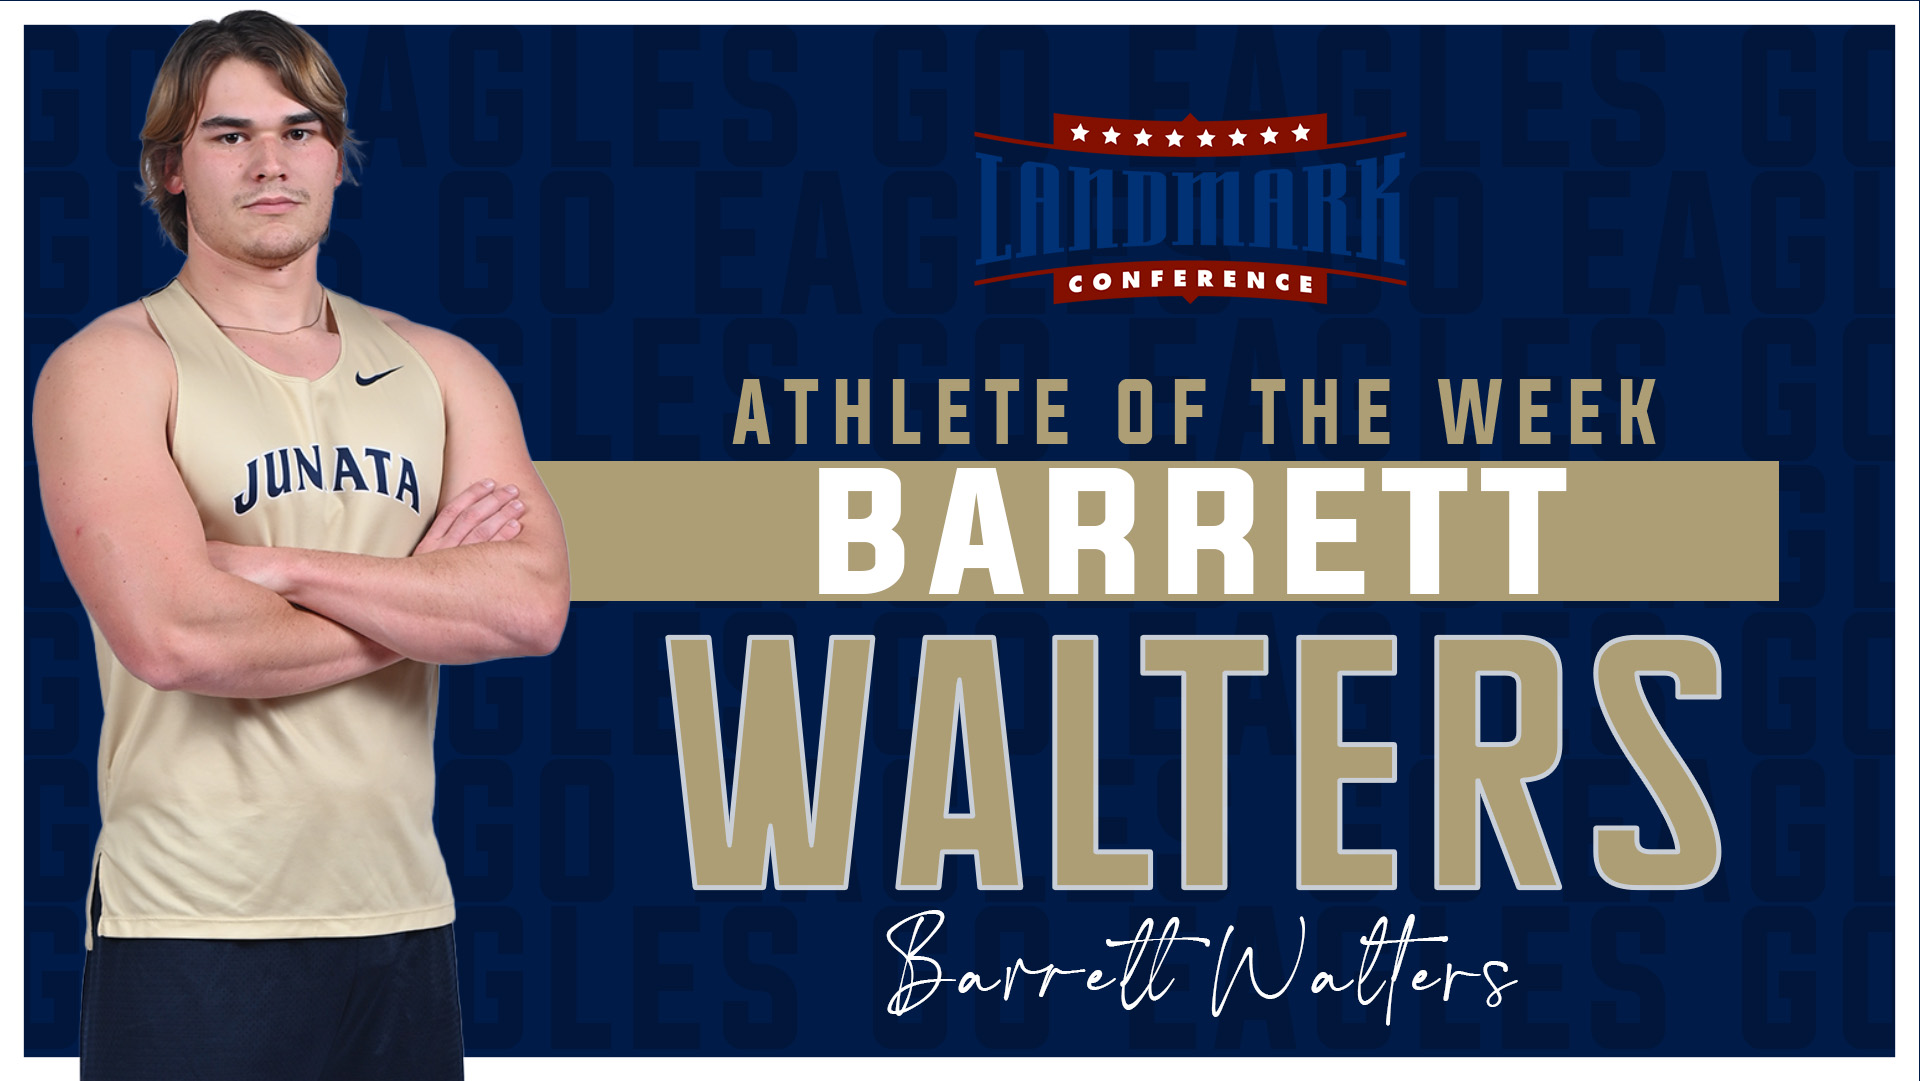 Walters Named Landmark Athlete of the Week for Field Events